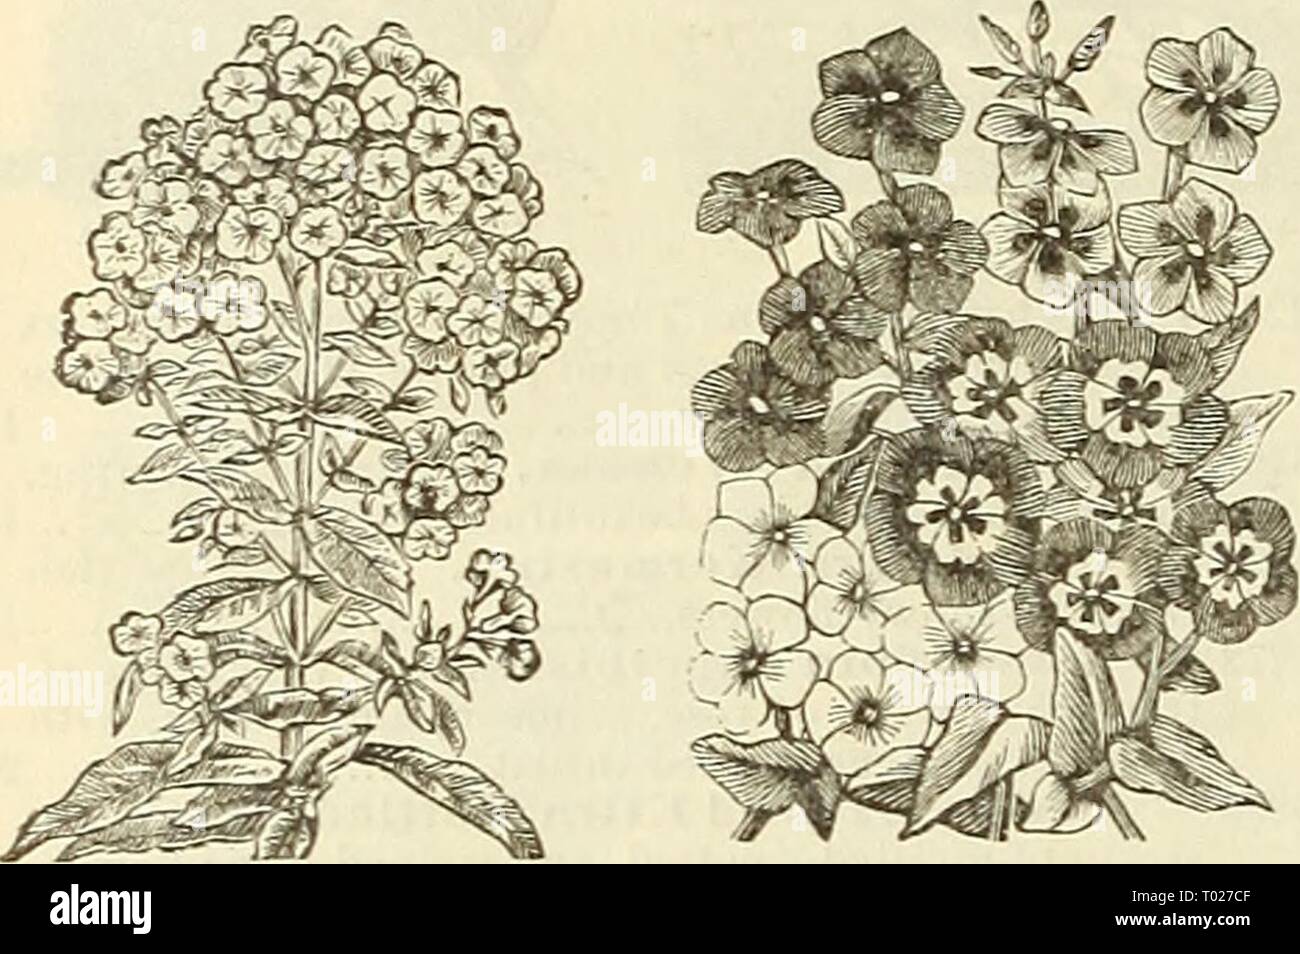 Dreer's garden calendar for 1887 . dreersgardencale1887henr Year: 1887  60 DEEEE'S RELIABLE SEEDS PER PKT. PH LO X—Continued, 6328 P. Peach Blossom. Large flowers of a delicate salmon tint 10 6326— Radowitzi. Rose, striped white 10 6330— Mixed. All colors. Per oz., $1.00 5 PHLOX DRUMMOND! GRANDlFLORA. An improvement on the old varieties in stronger, more compact growth, and larger flowers, with white cen- tres, admirably relieved bv a dark violet eve; li feet. 6331 P. Alba'Pura. Pure white 10 6334— Carminea Alba Oculata. Rosy carmine, white eye 10 6332— Coccinea. Rich brilliant scarlet 10 6335 Stock Photo